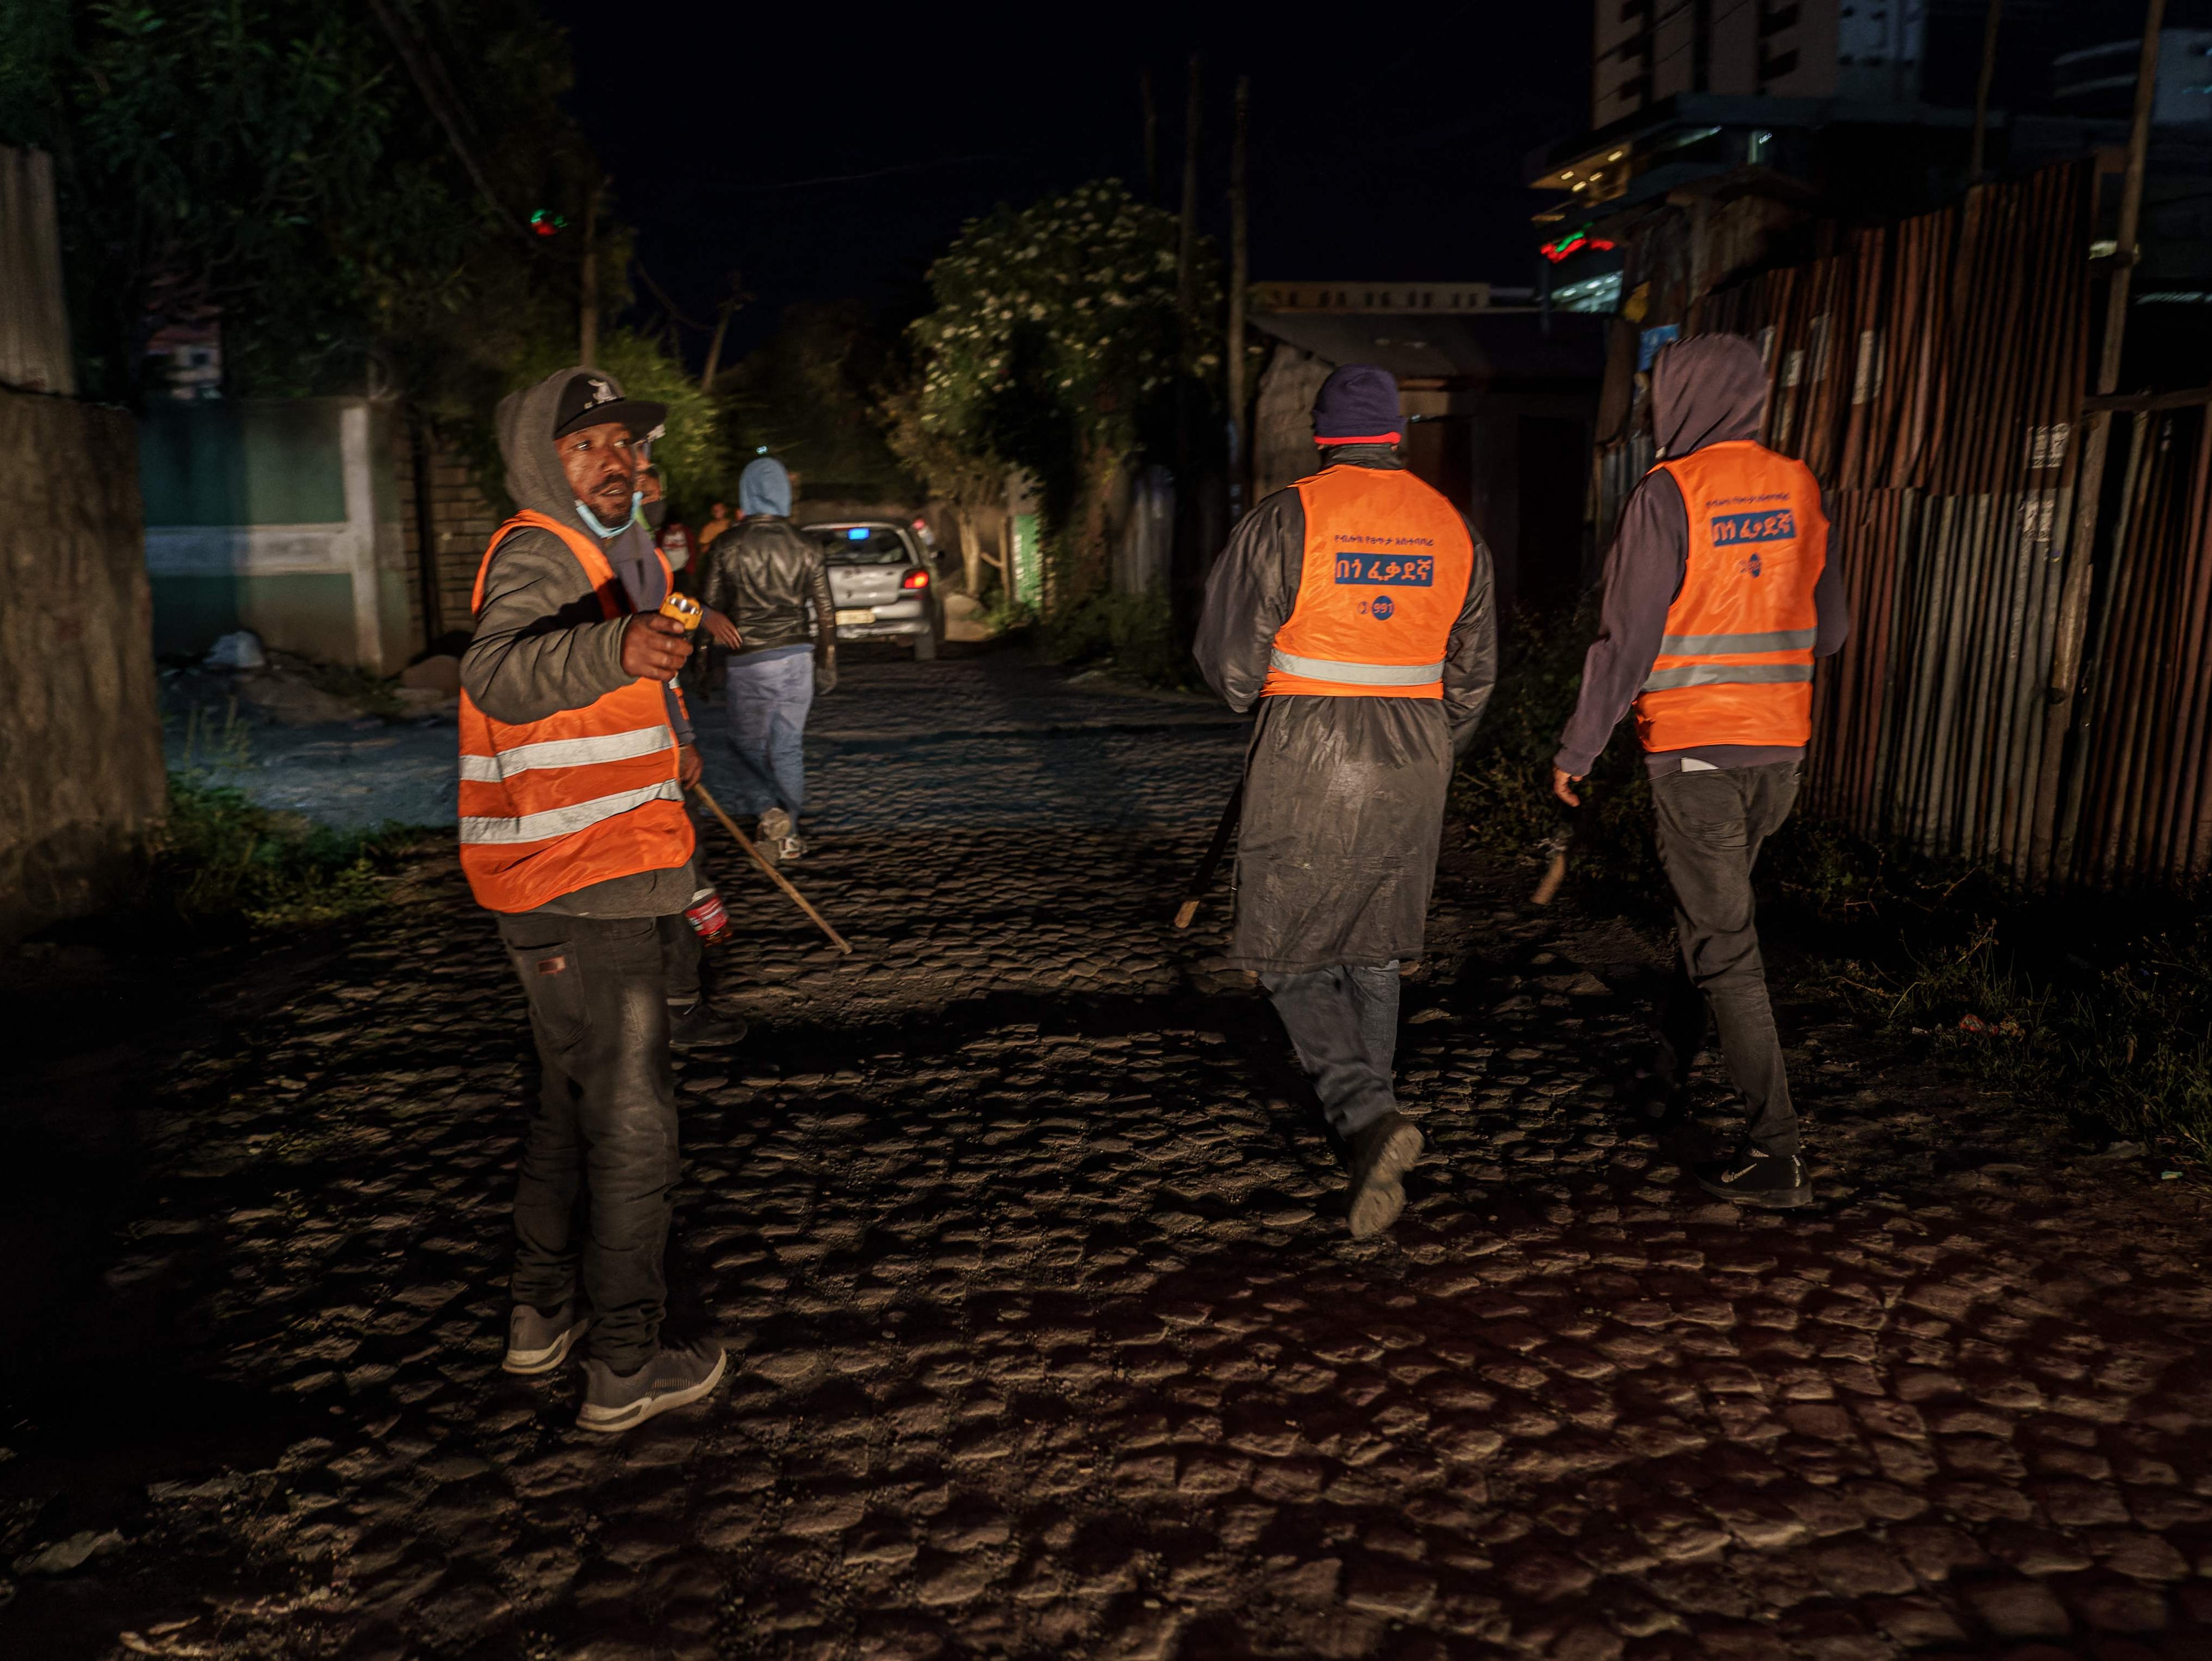 Volunteers conduct a night patrol in Addis Ababa